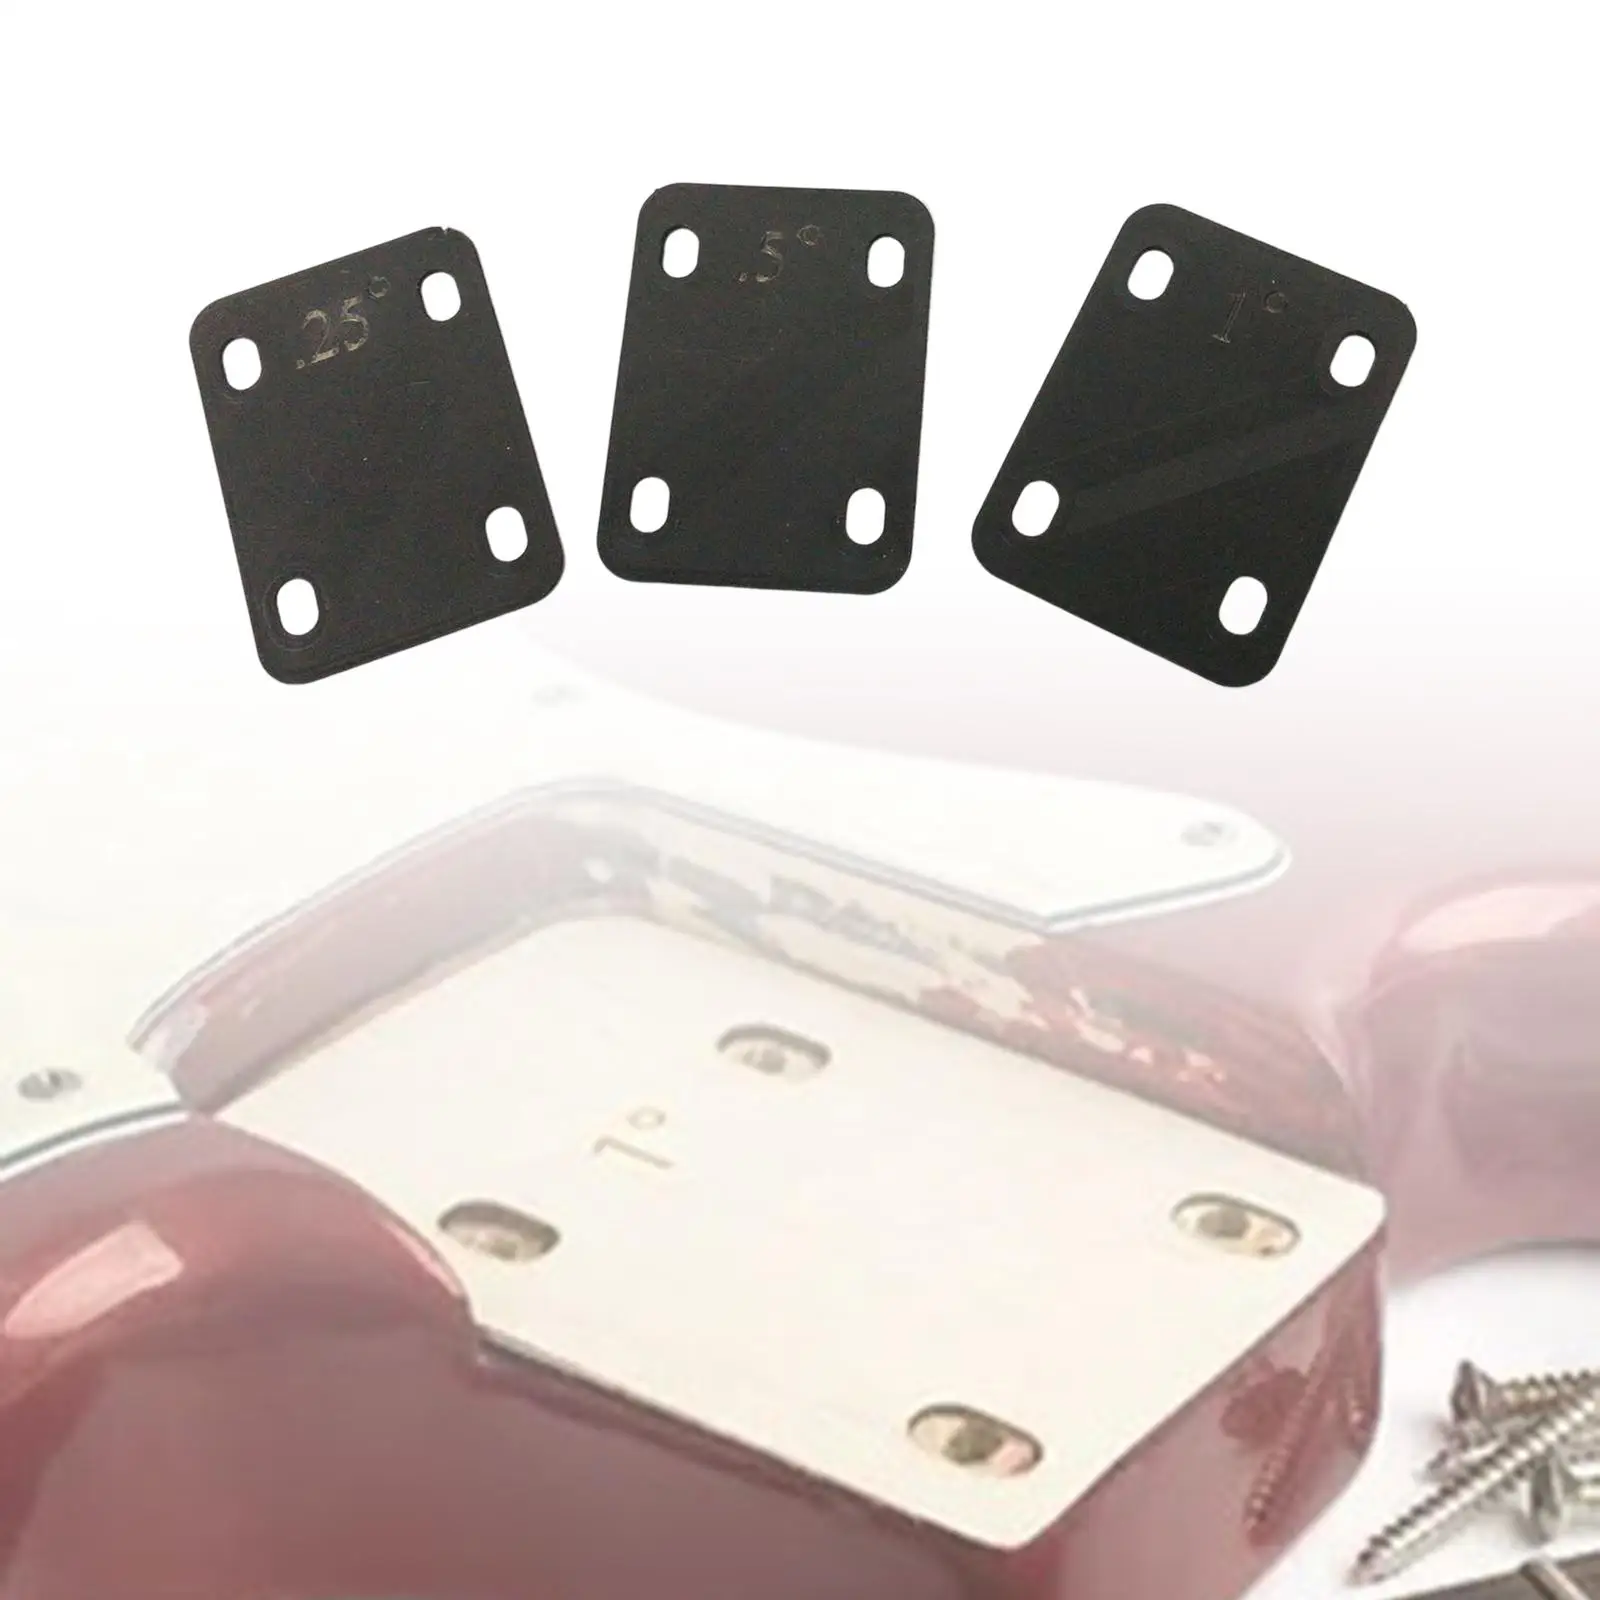 

3 Pieces 4 Holes Neck Plate Gasket Accs Protective Durable Cushion Shim Kits Replaces Pad for Guitarist Bass Electric Guitar